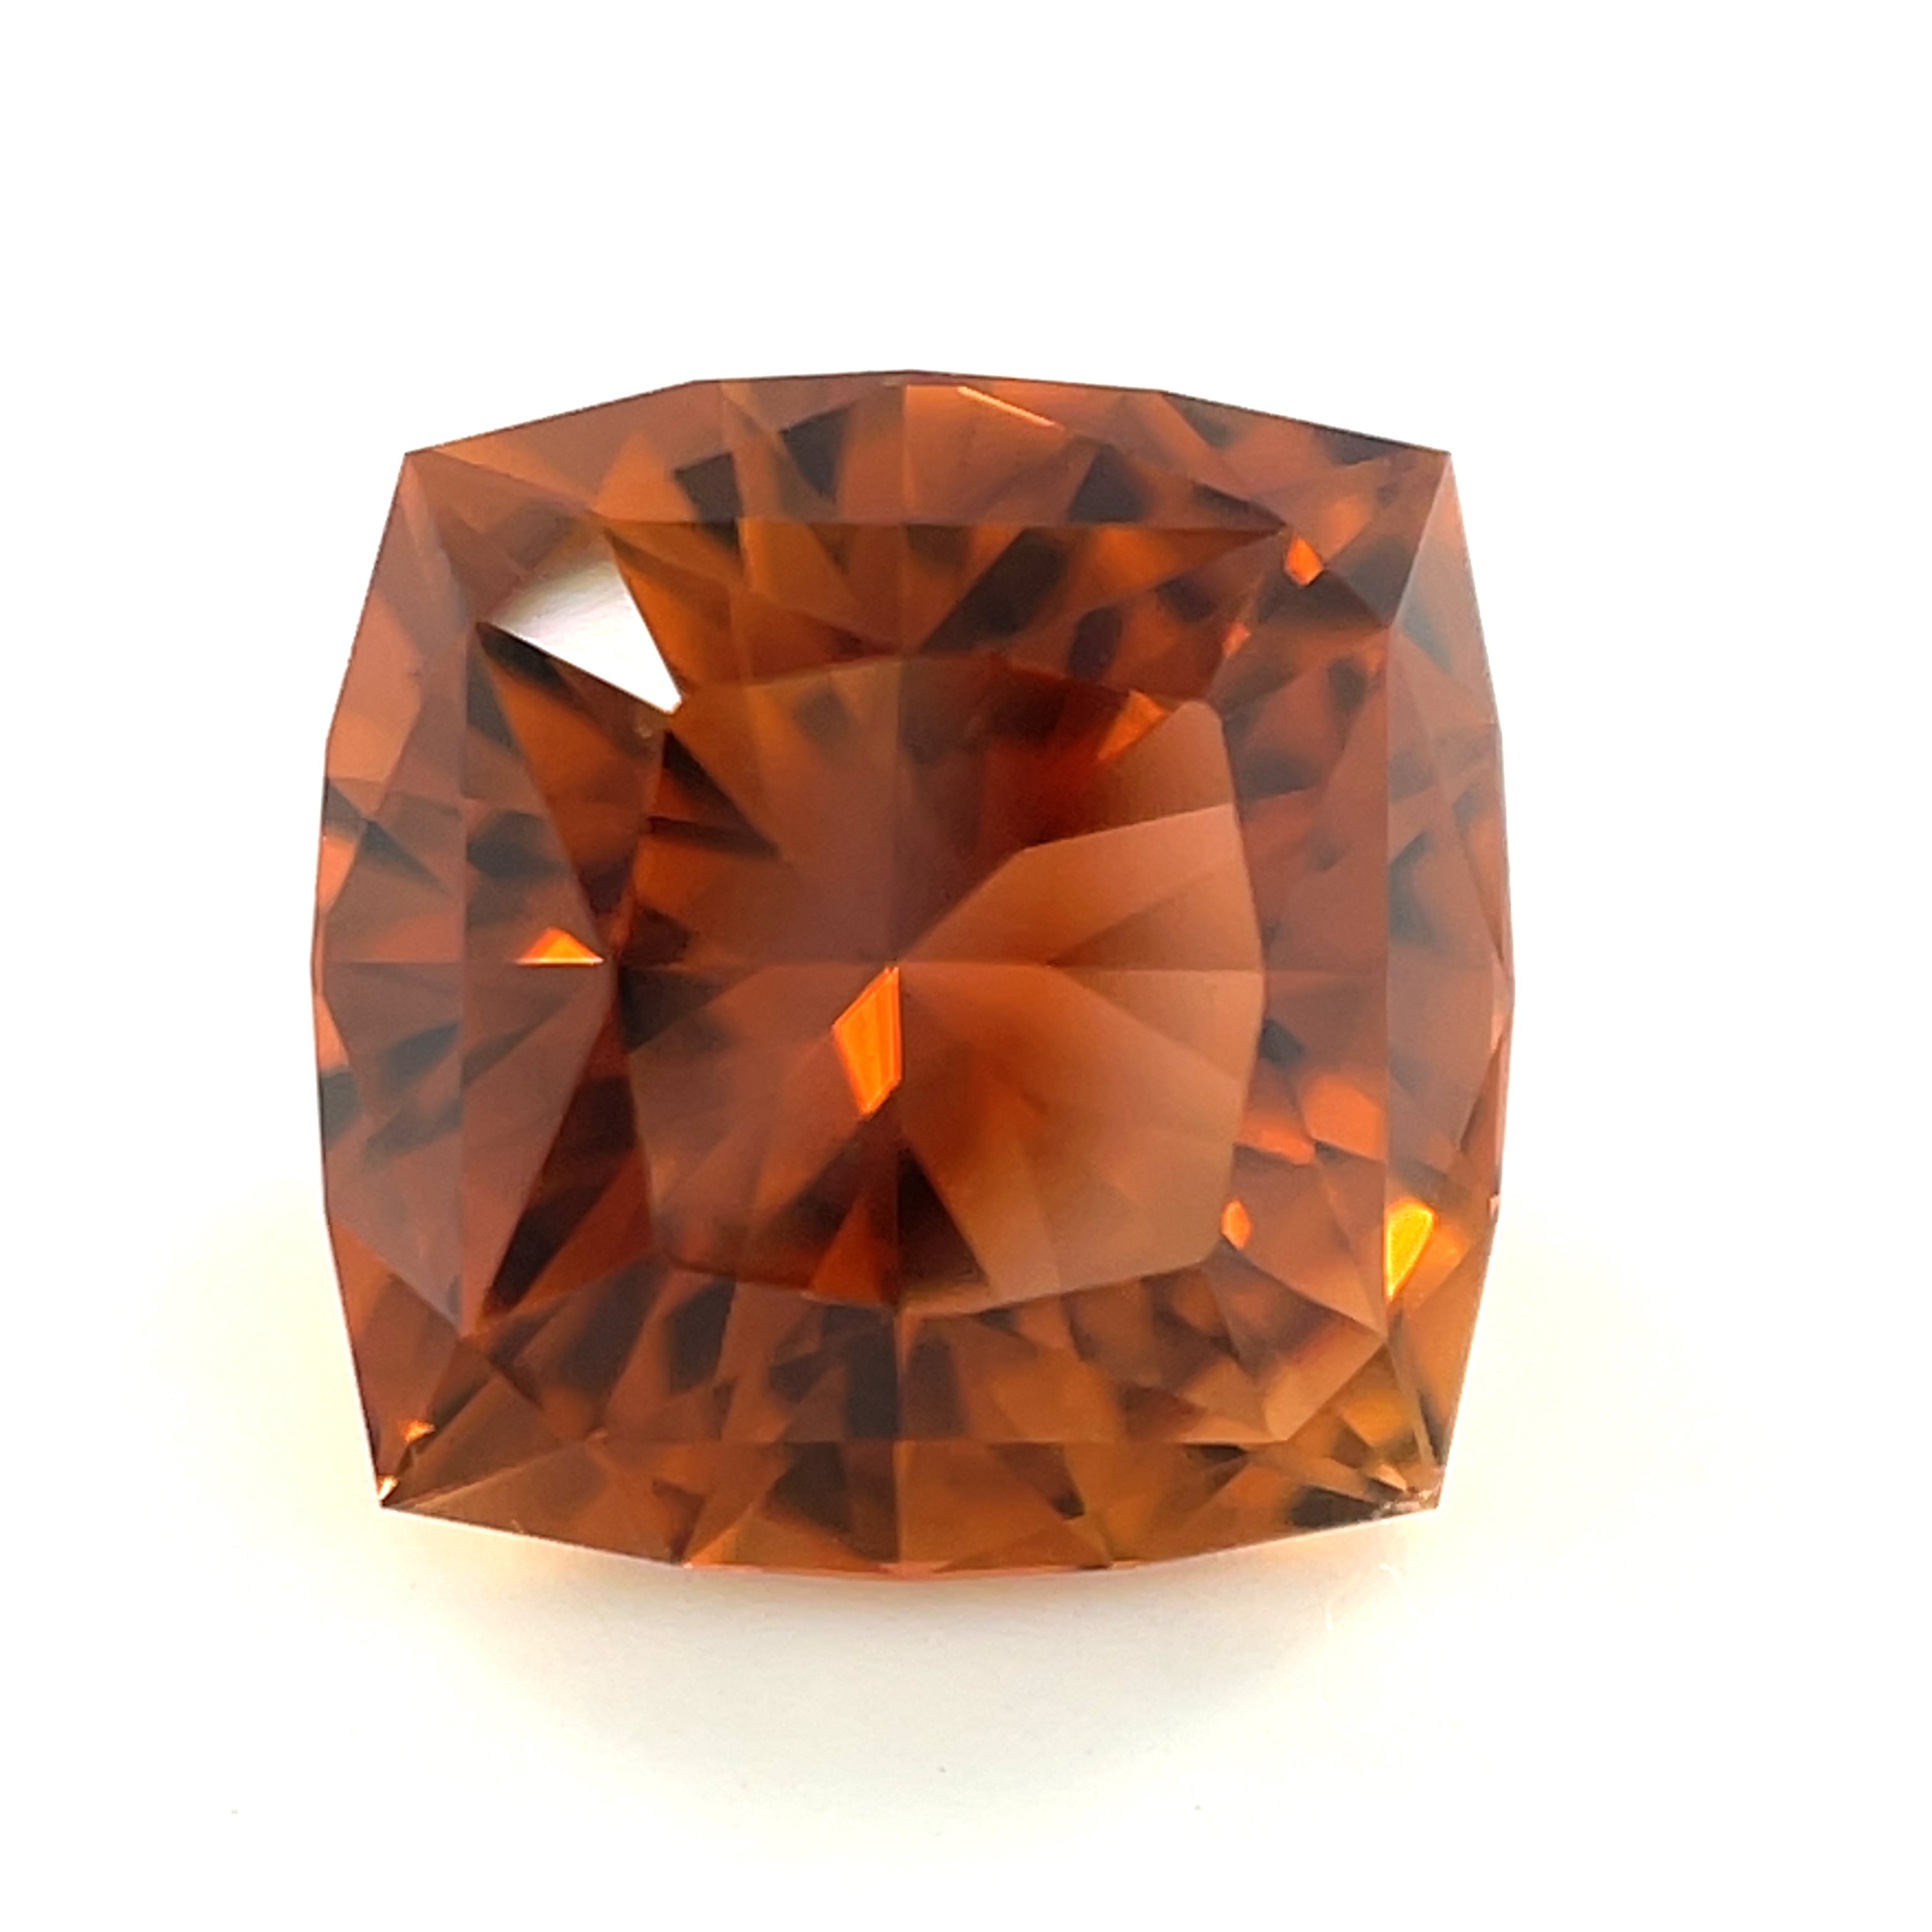 Faceted Tourmaline - 3.39 CTW